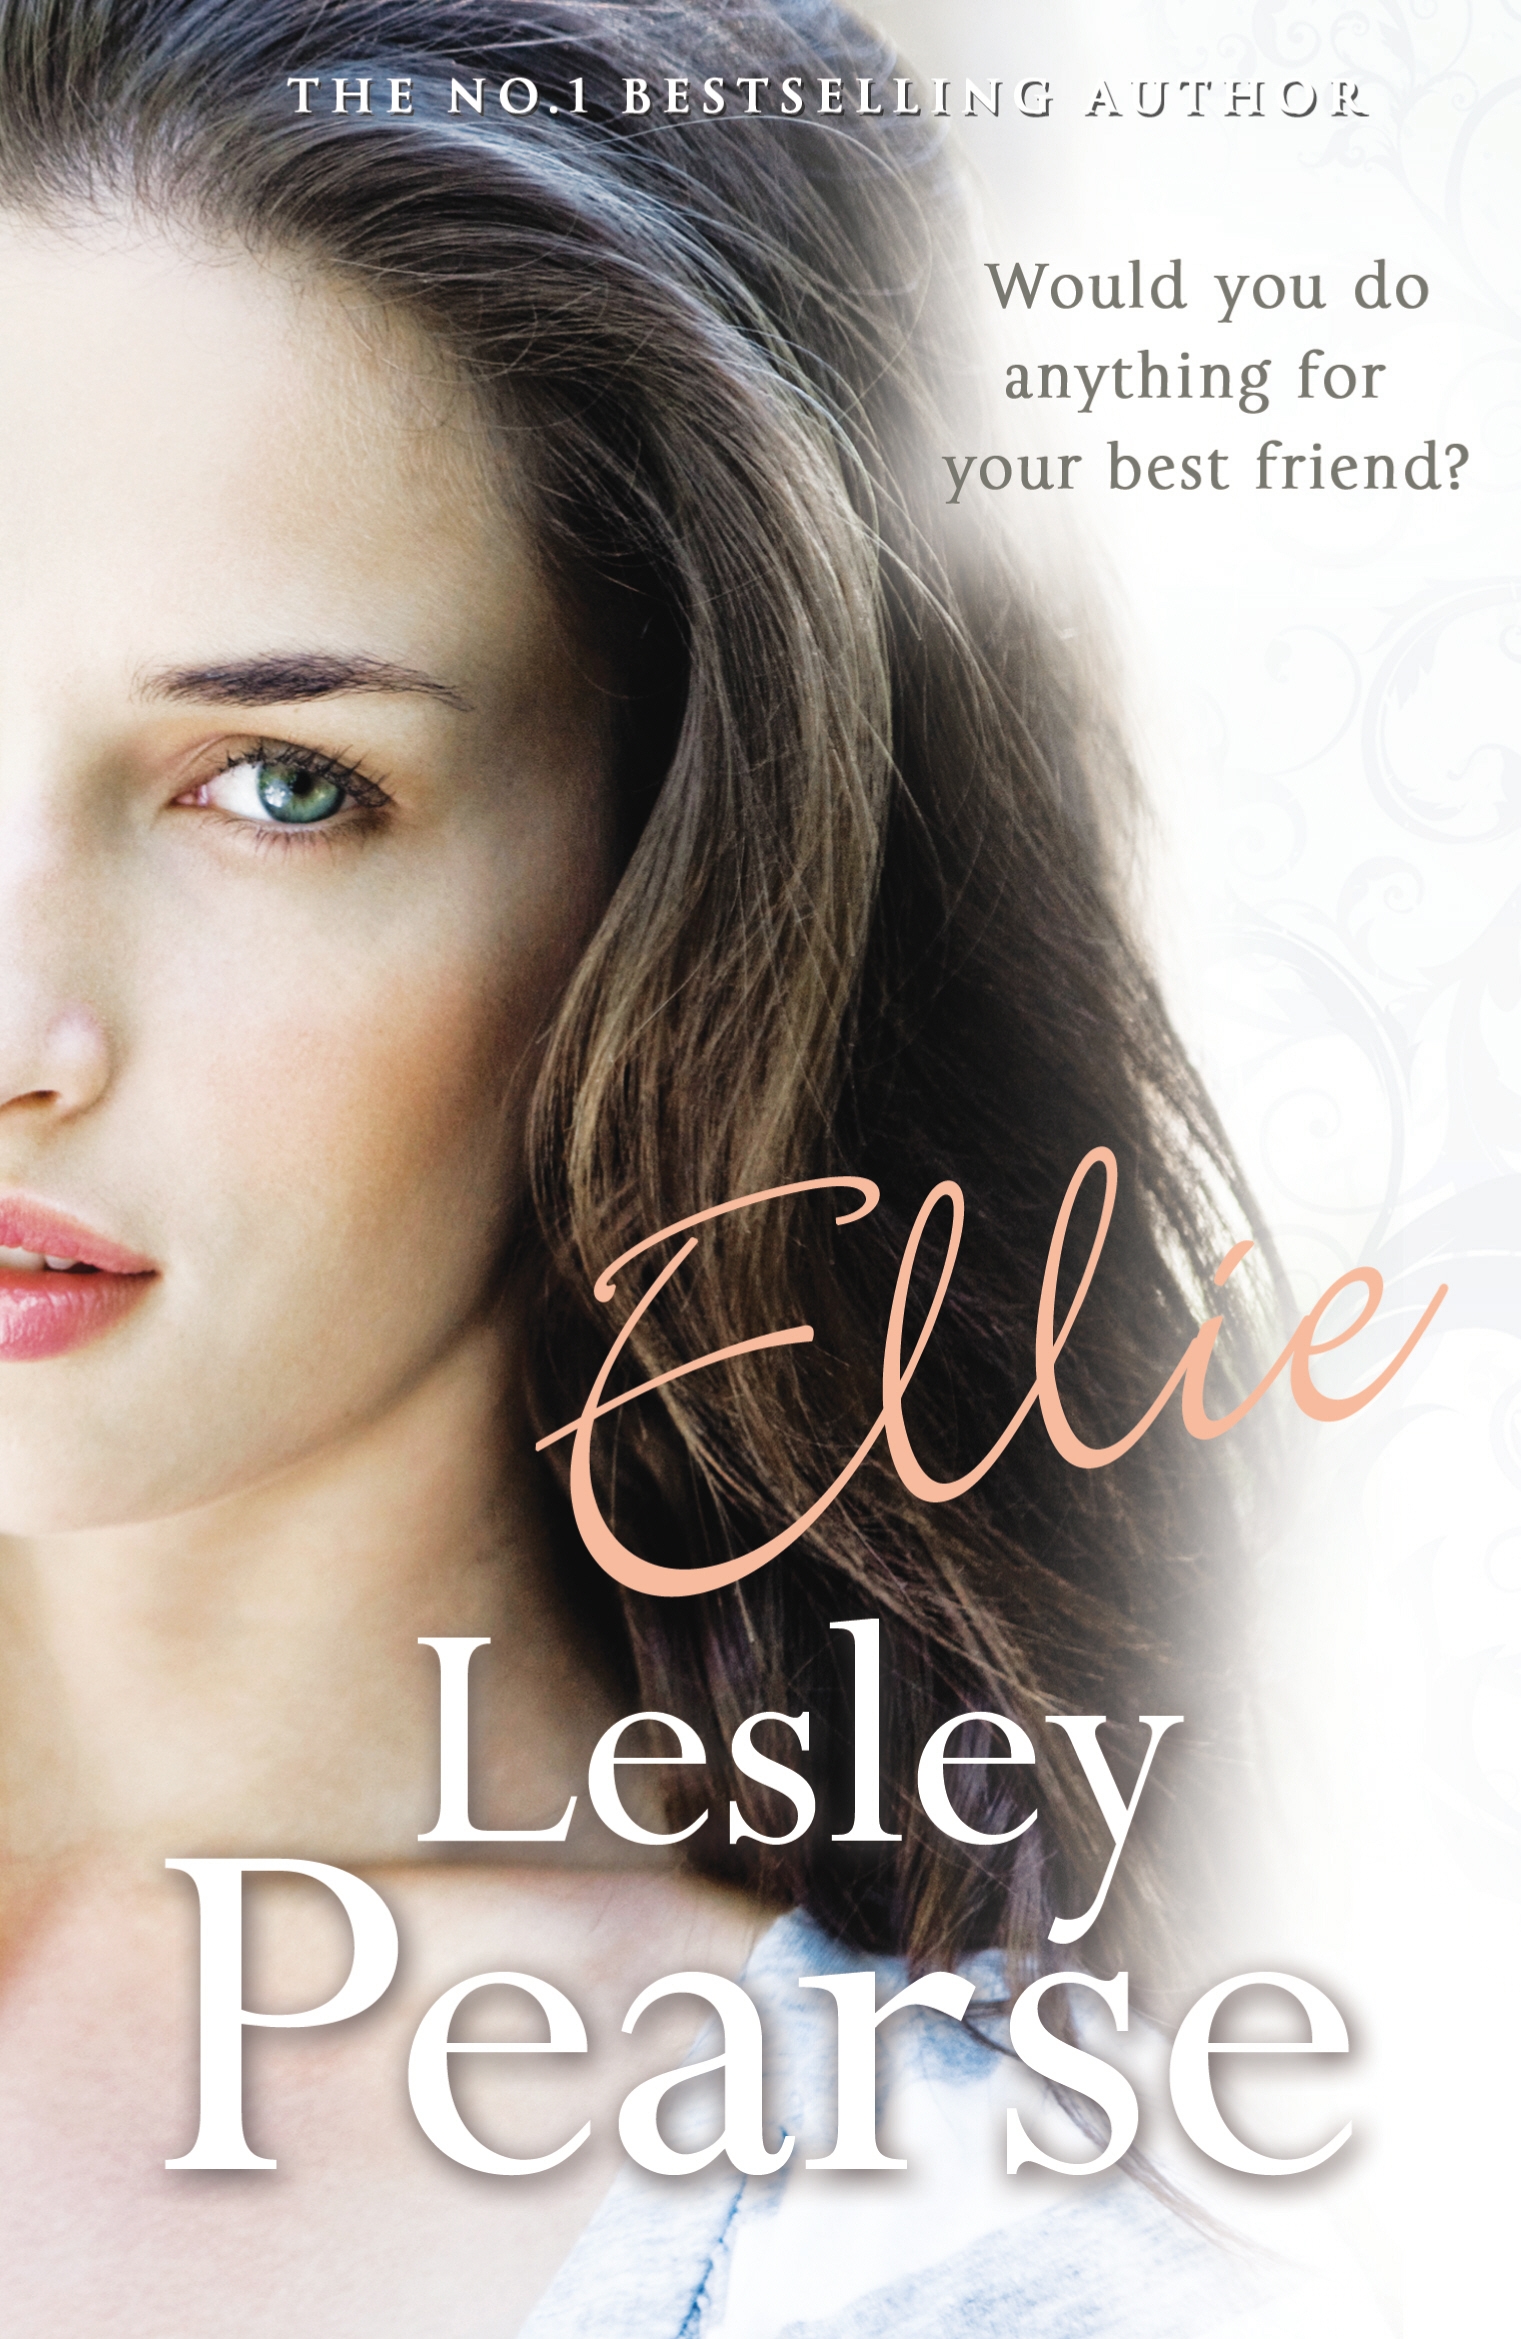 Ellie by Lesley Pearse - Penguin Books New Zealand